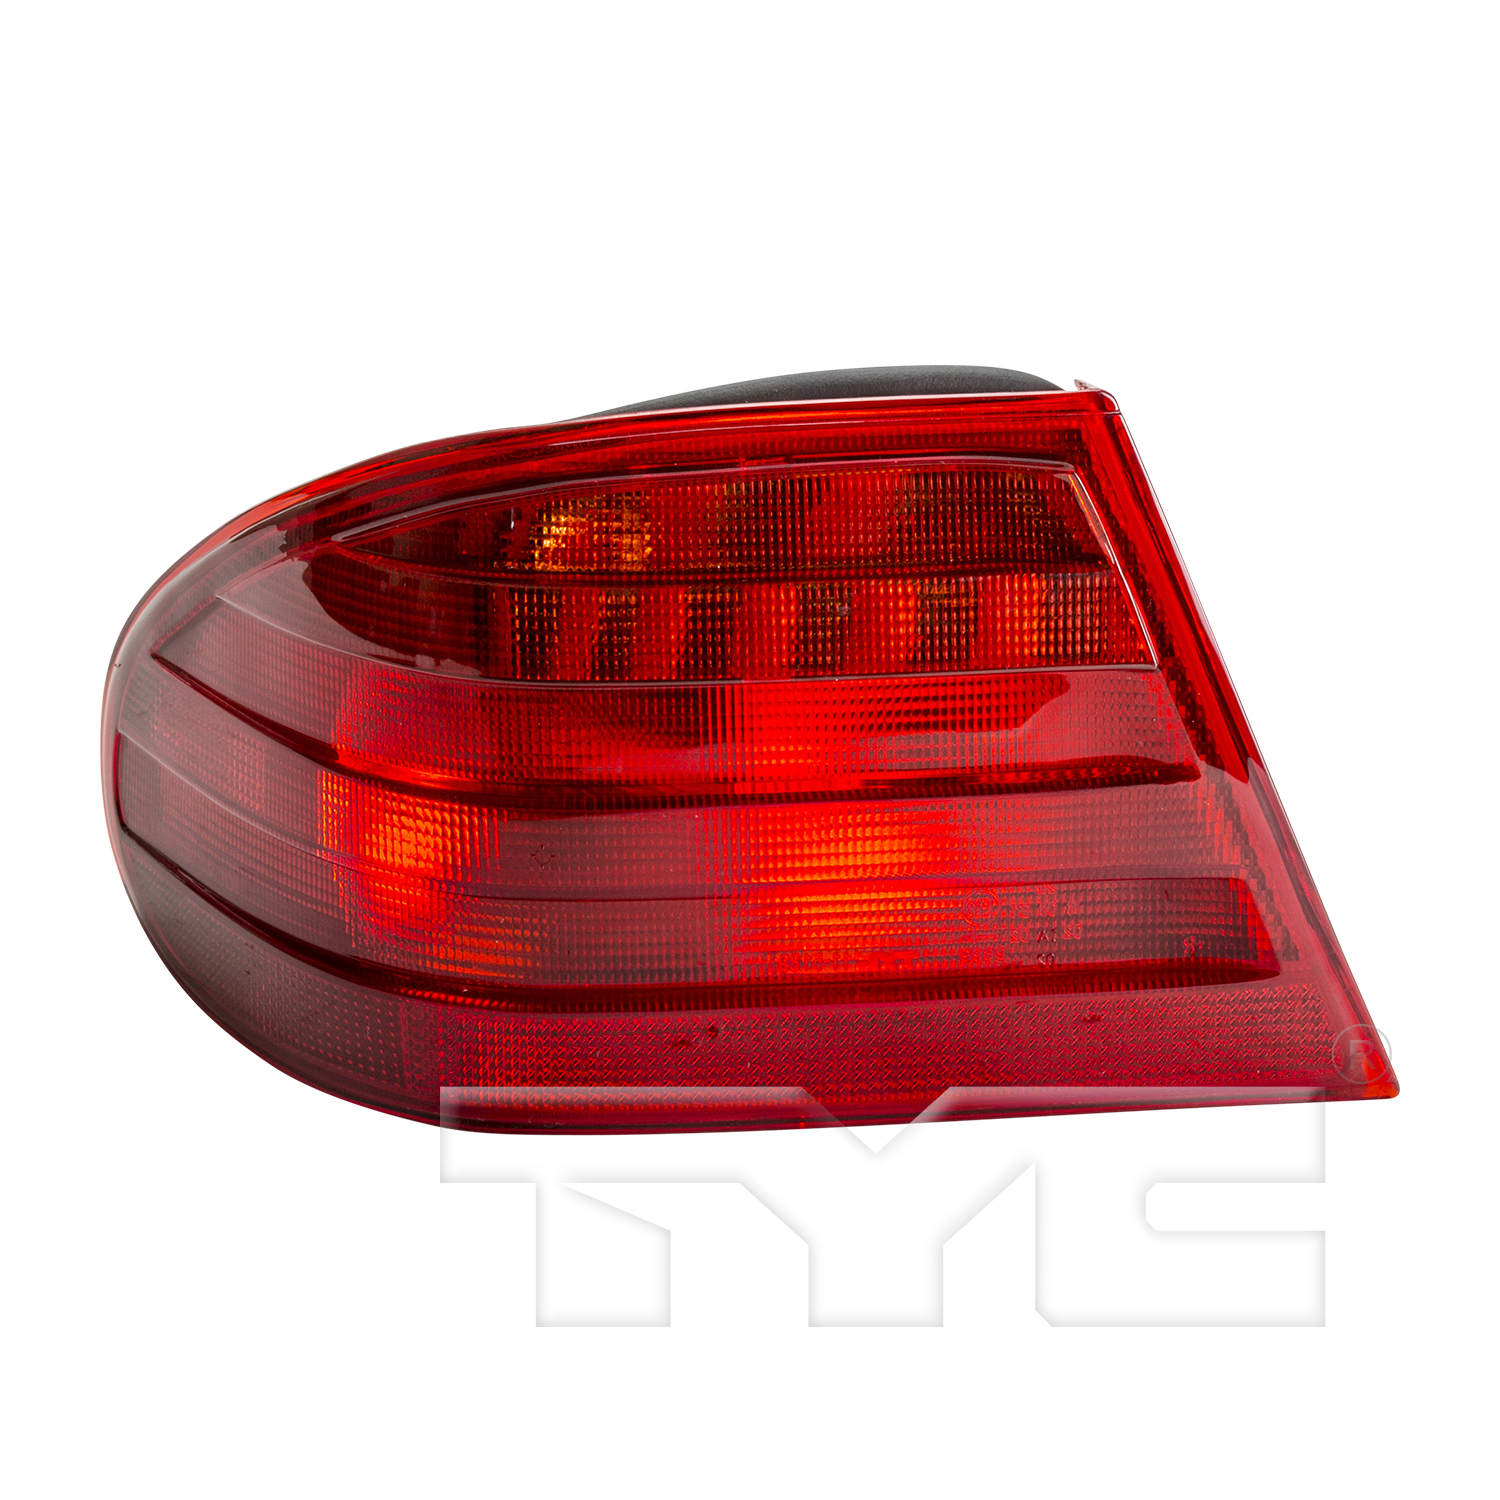 Aftermarket TAILLIGHTS for MERCEDES-BENZ - E420, E420,97-97,LT Taillamp assy outer